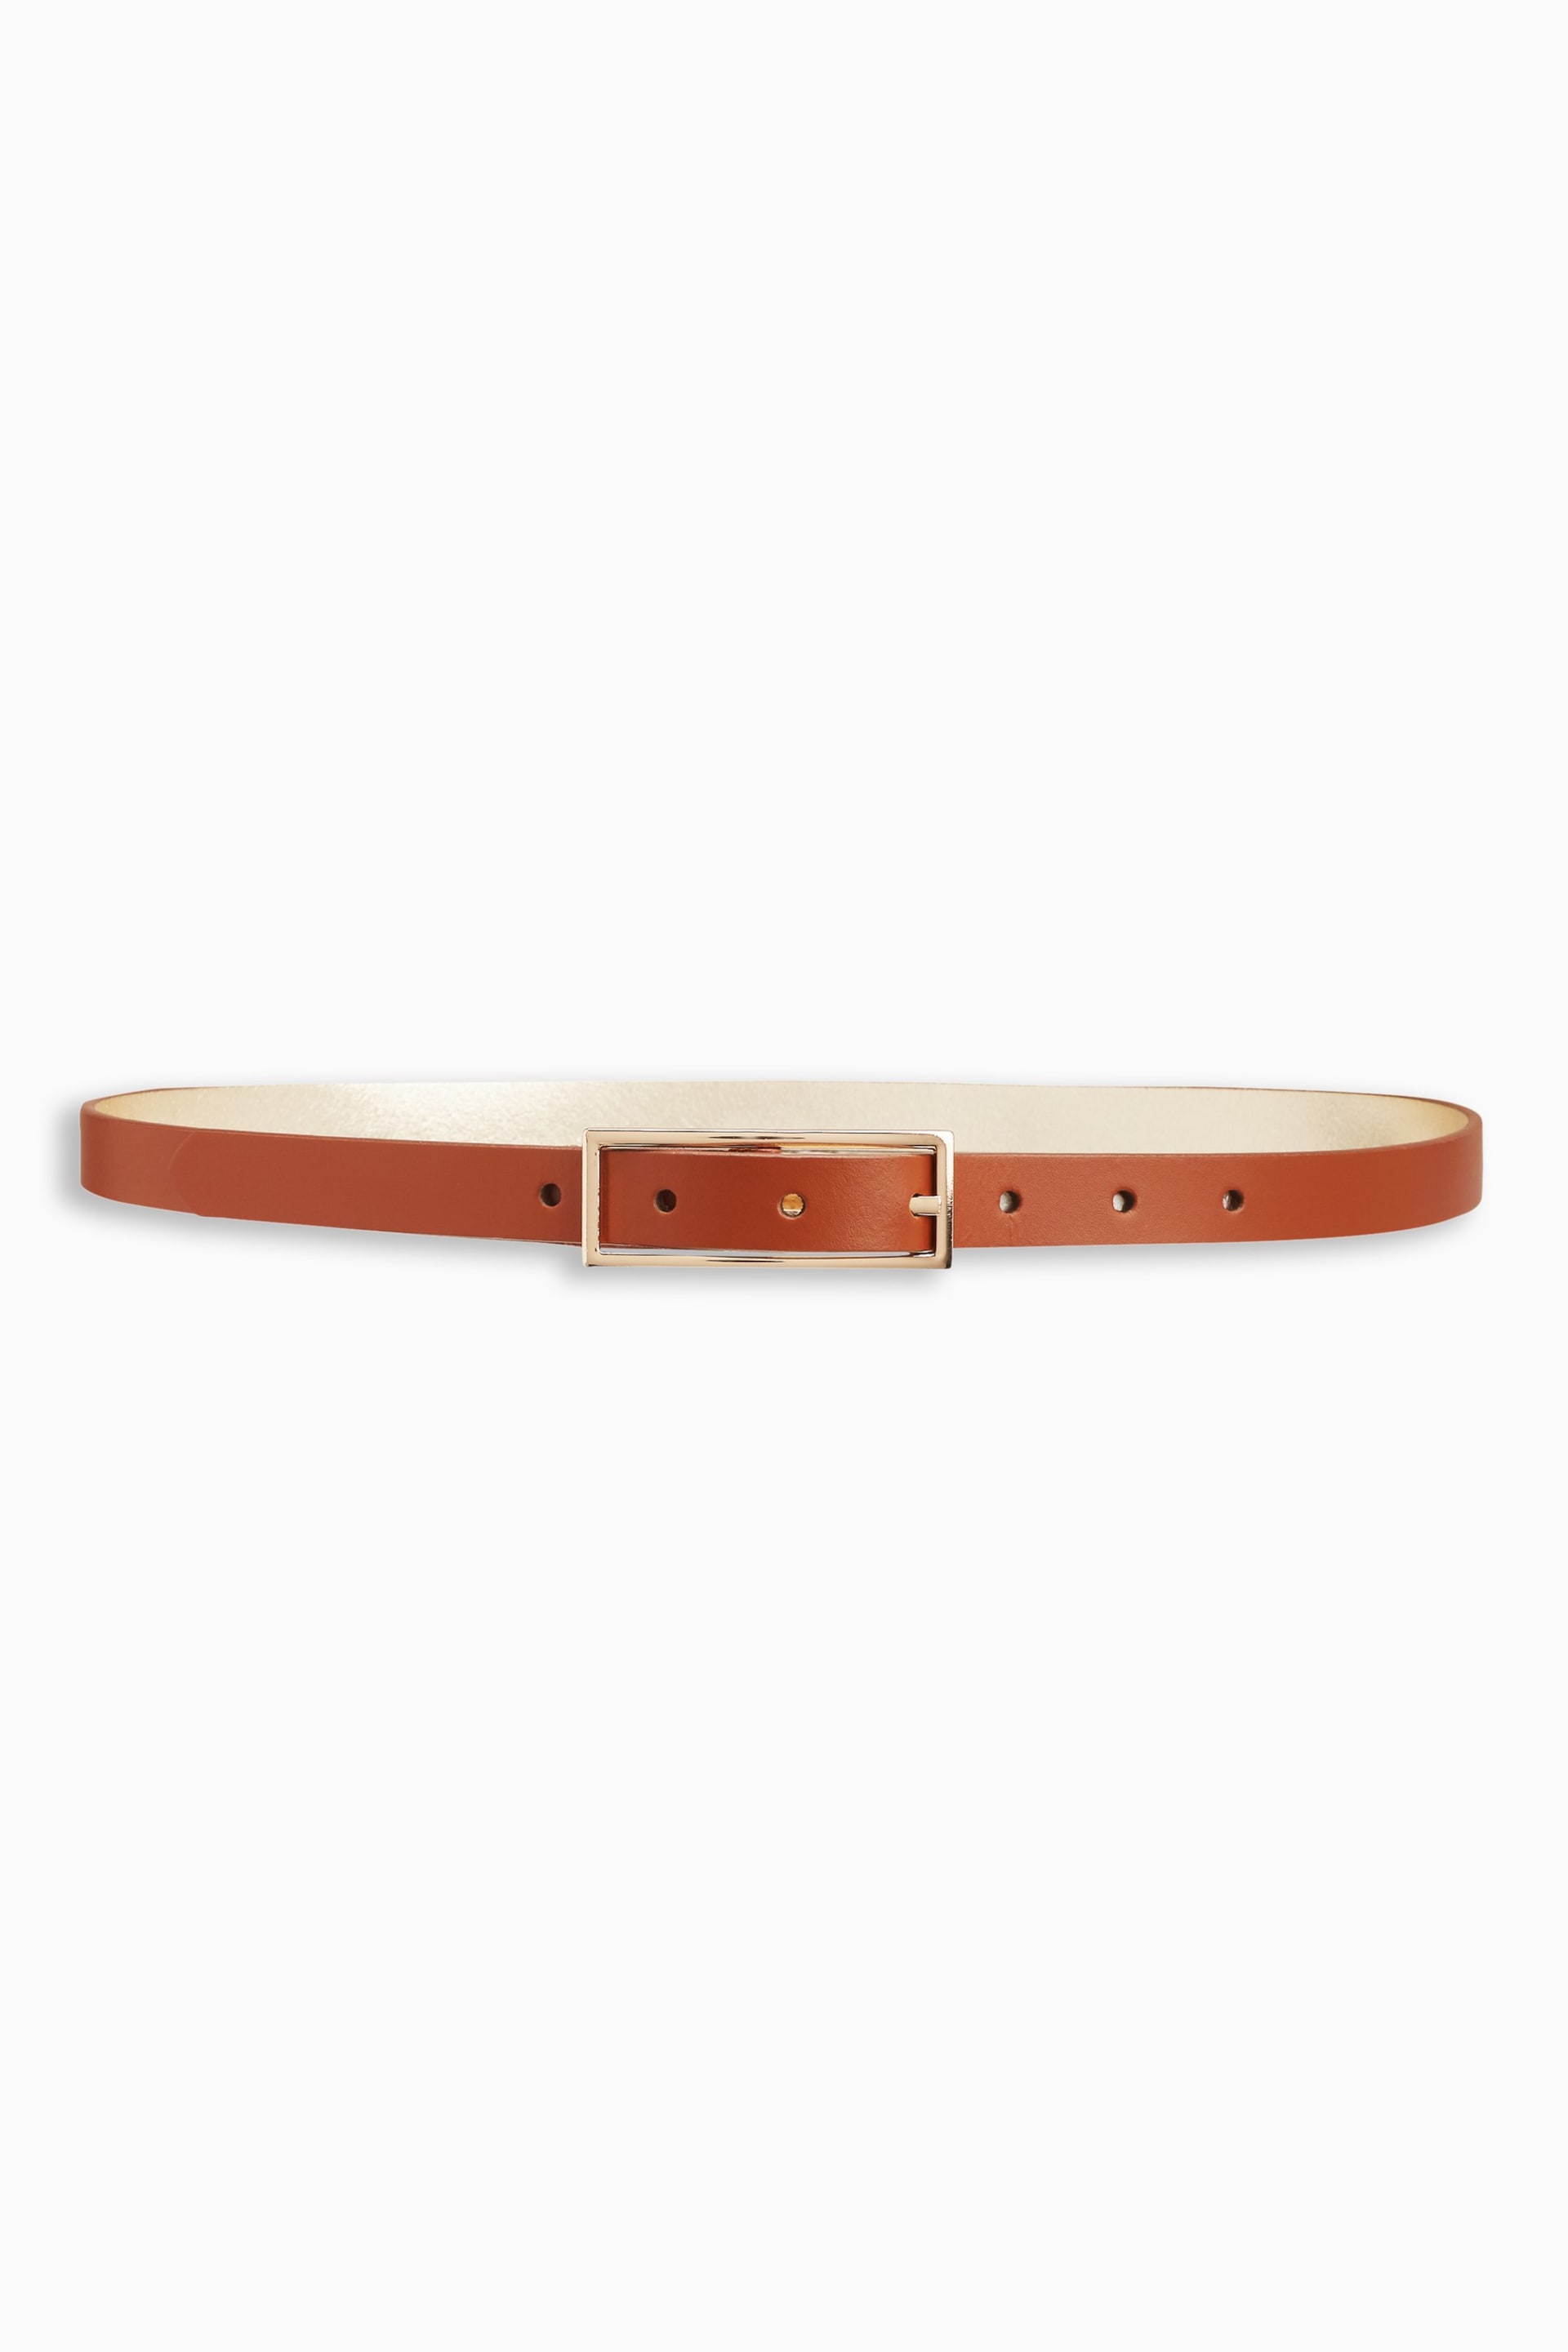 Tan/Gold Leather Reversible Jeans Belt - Image 1 of 6